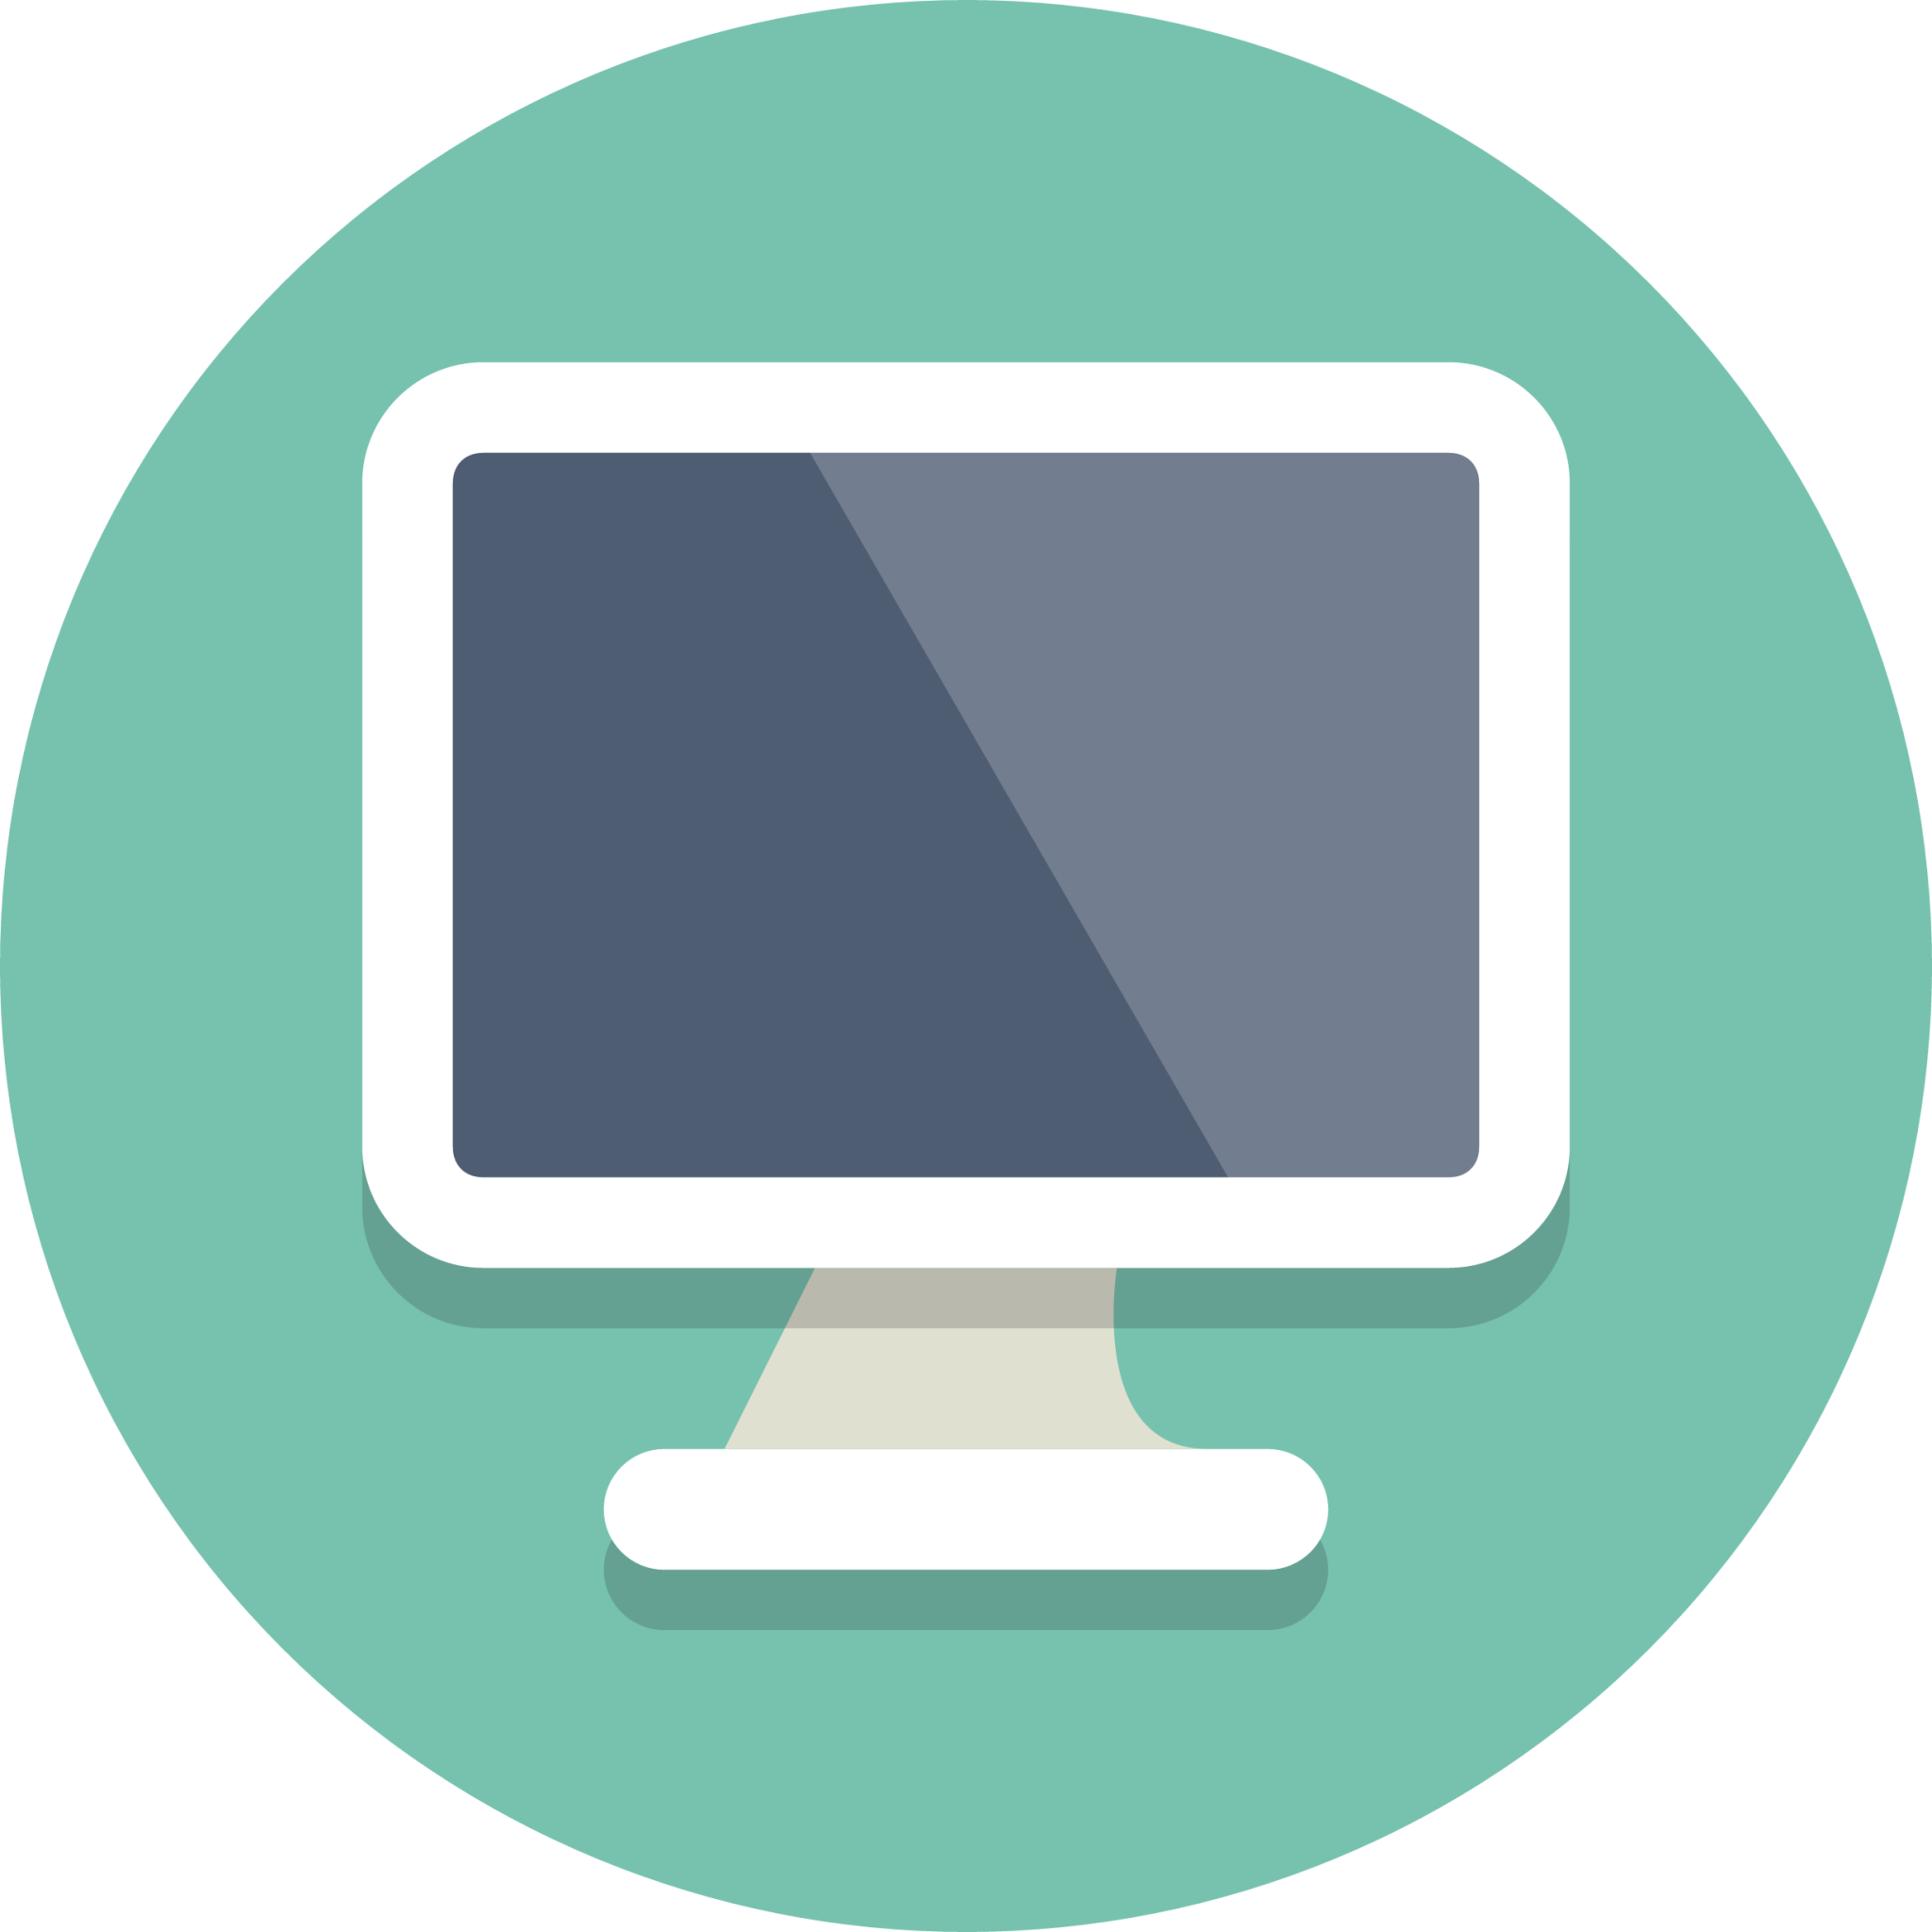 computer screen icon png